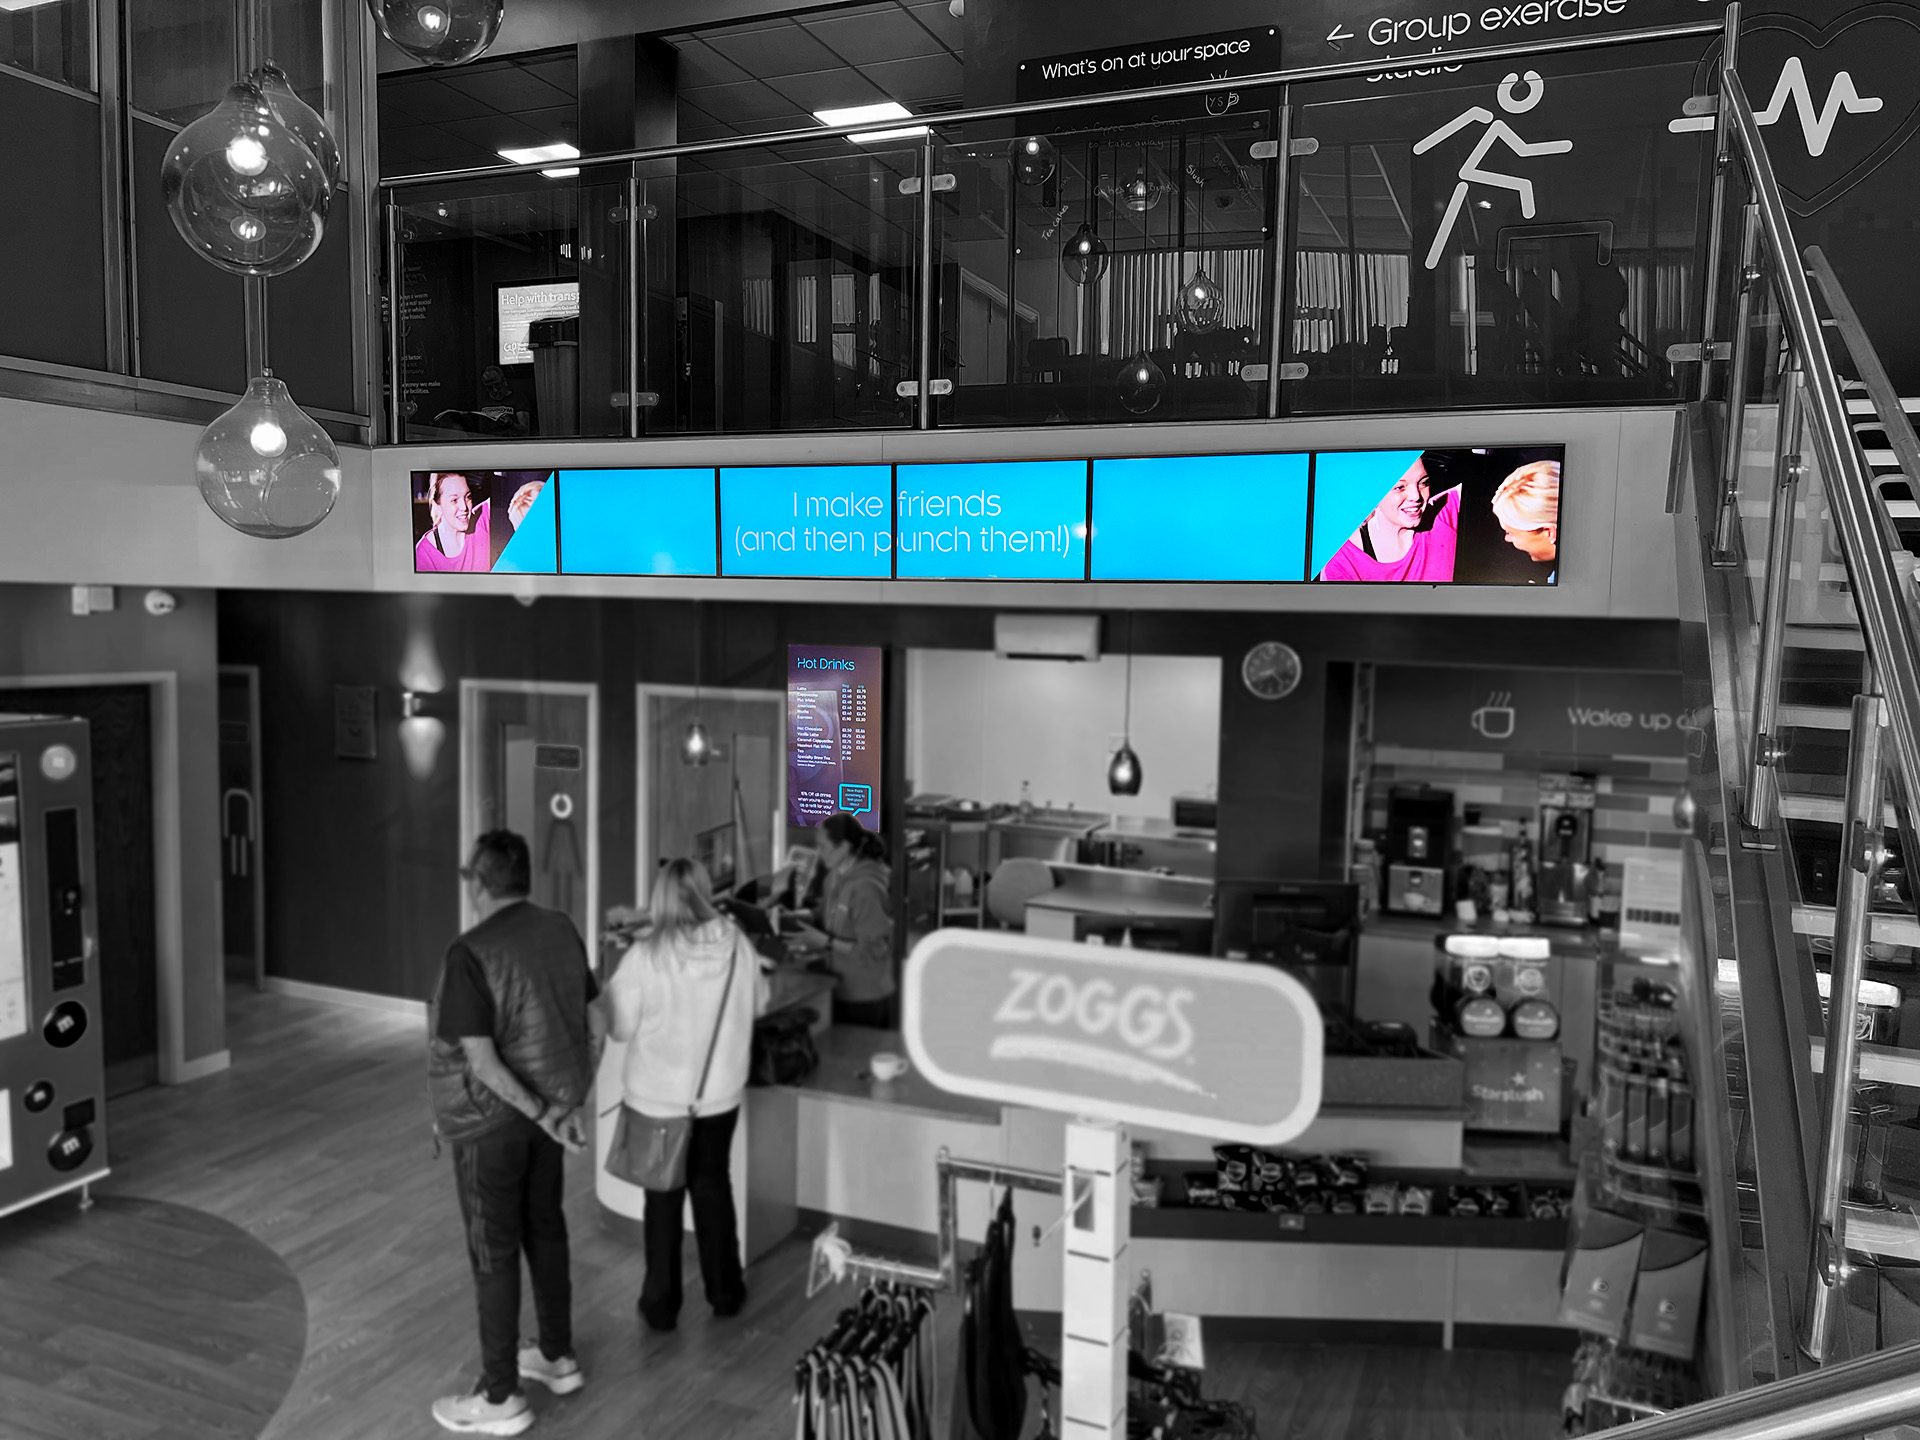 embed signage digital signage software - barnsley premier leisure BPL - 6x1 video wall gym fitness leisure digital signage